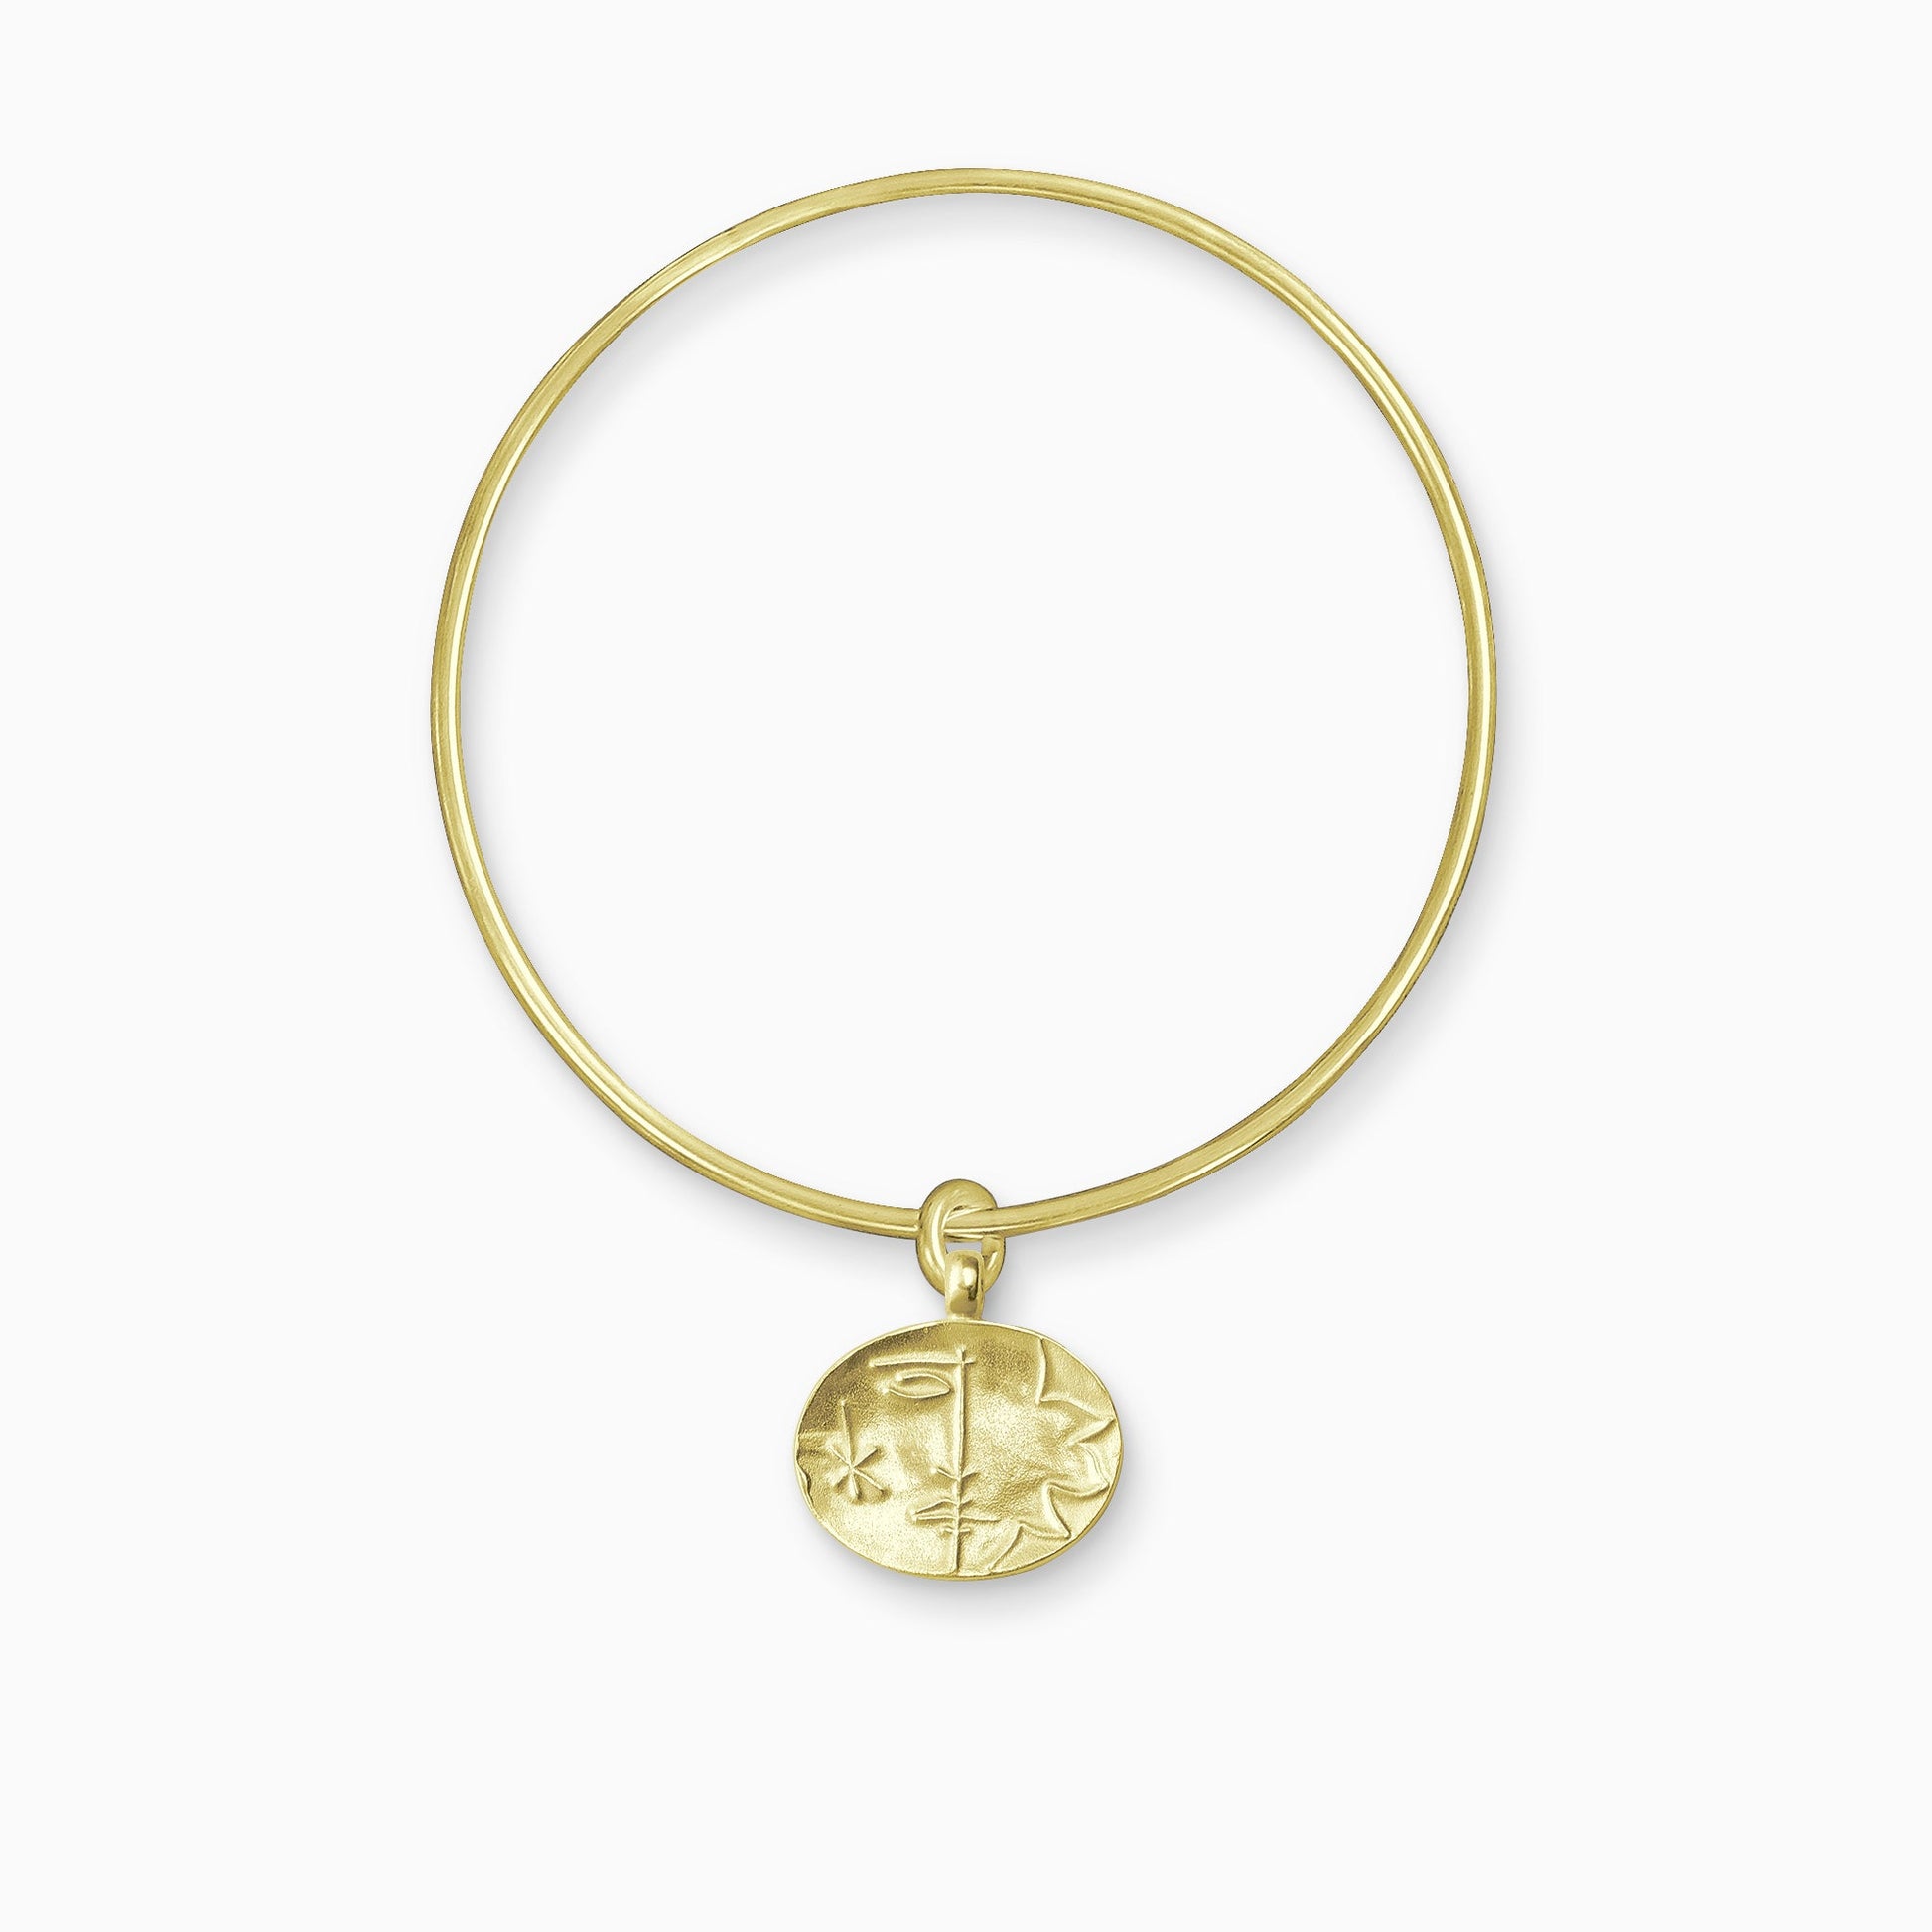 An 18ct Fairtrade yellow gold oval shaped charm with raised image of a Sun on one side and a Moon on the other, freely moving on a round wire bangle.  Charm 16mm x 20mm. Bangle 63mm inside diameter x 2mm round wire.